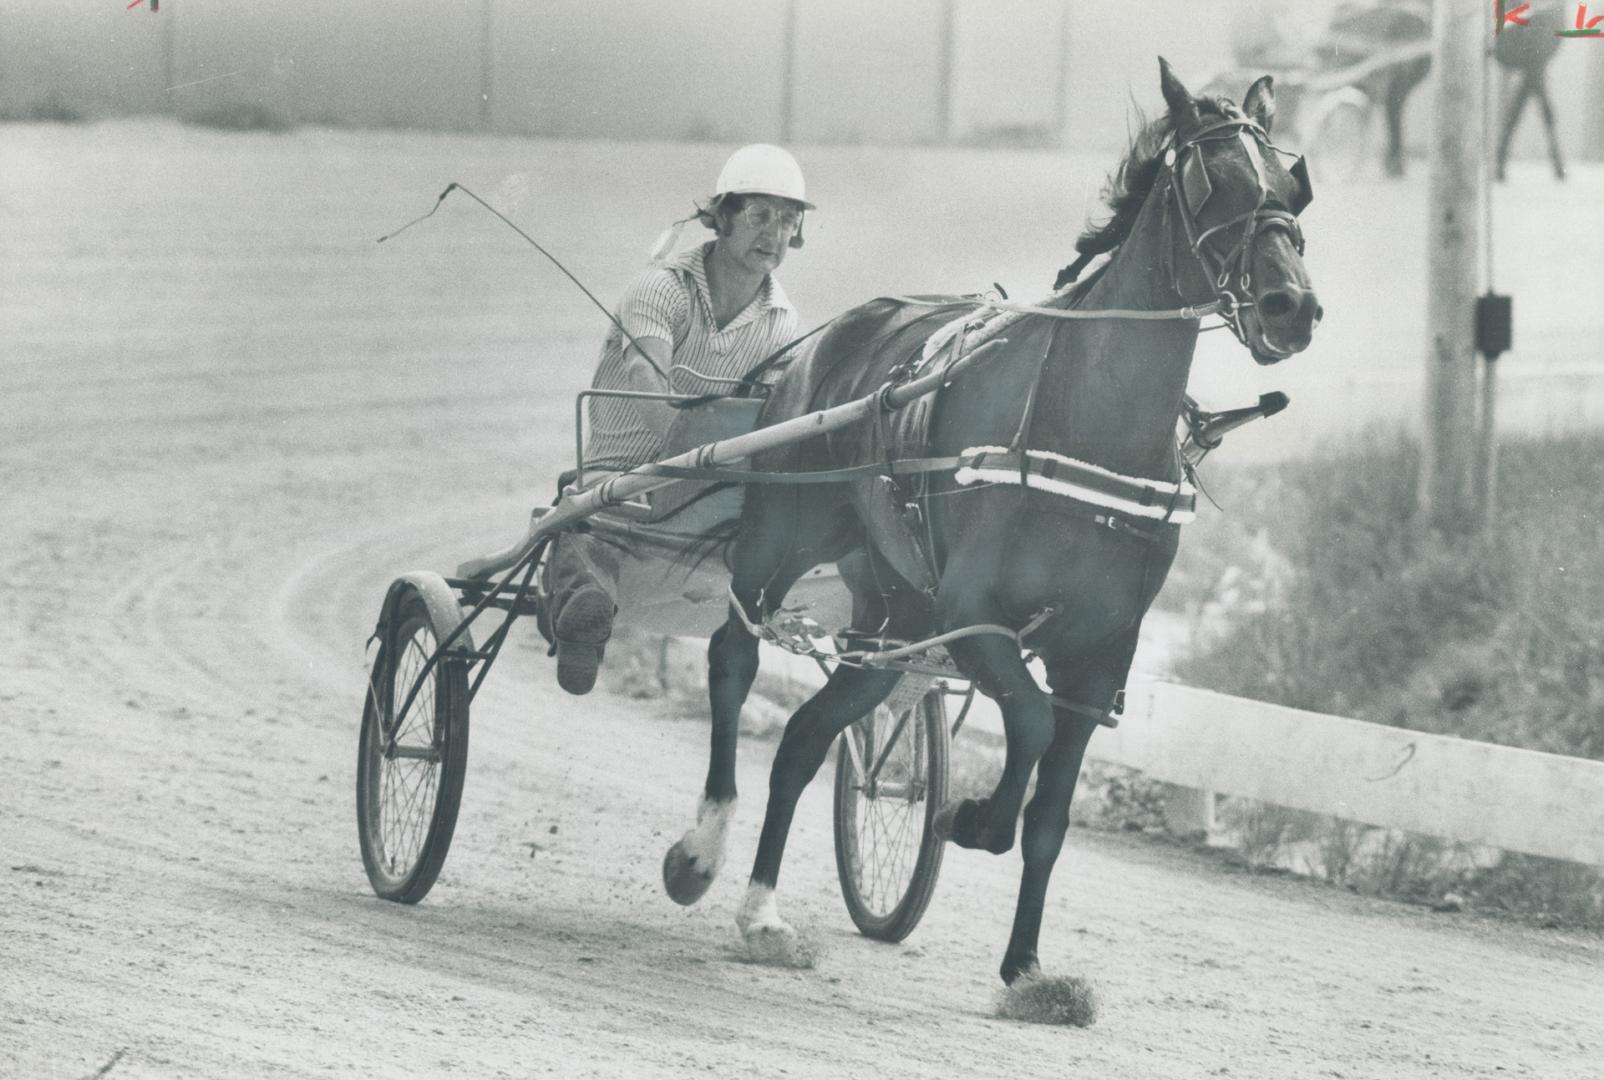 Toronto hockey star Rod Seiling works out one of his horses